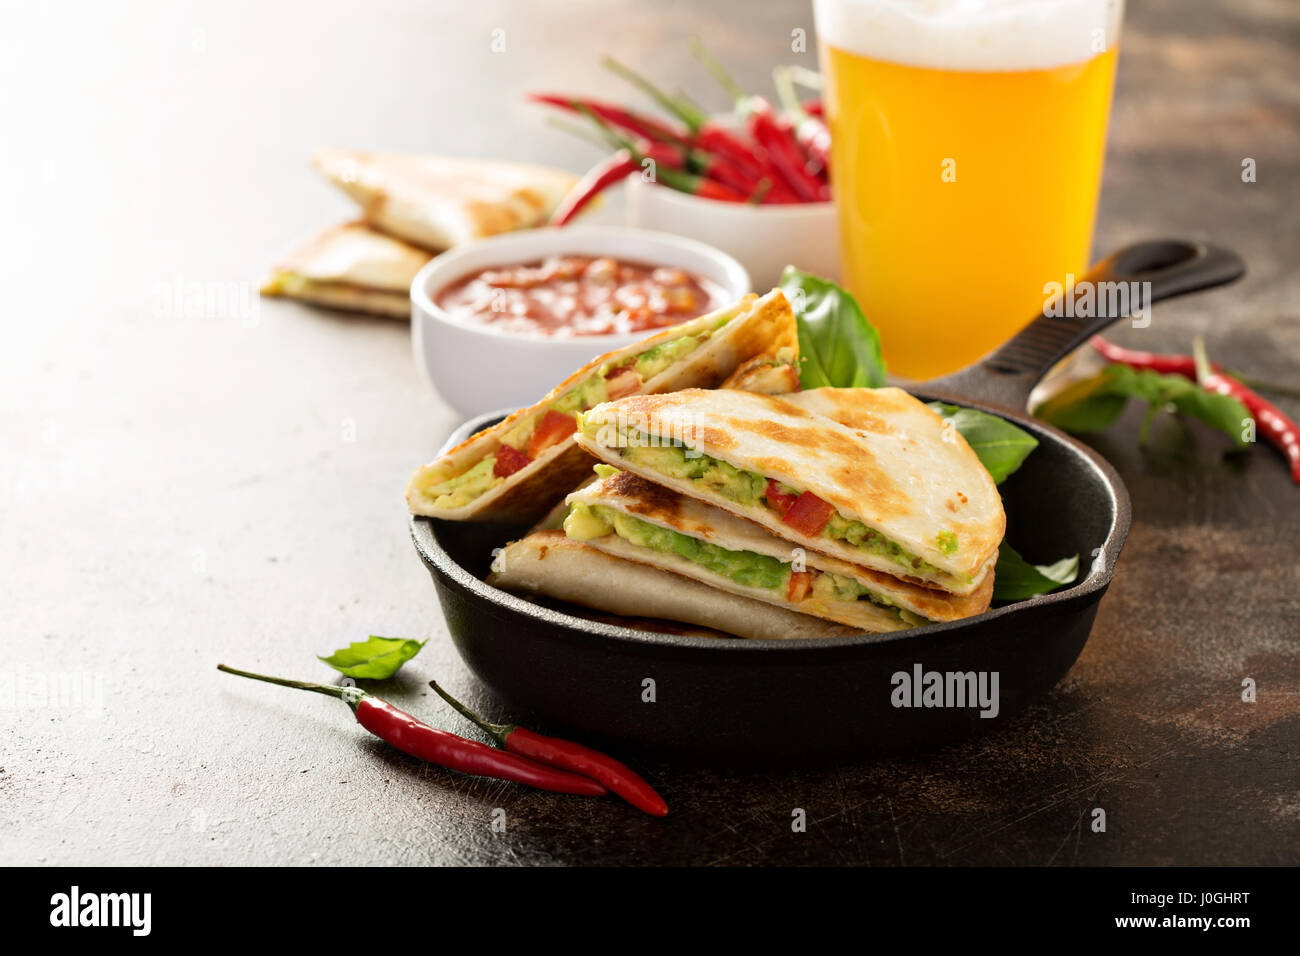 Vegan quesadillas with avocado and red pepper Stock Photo